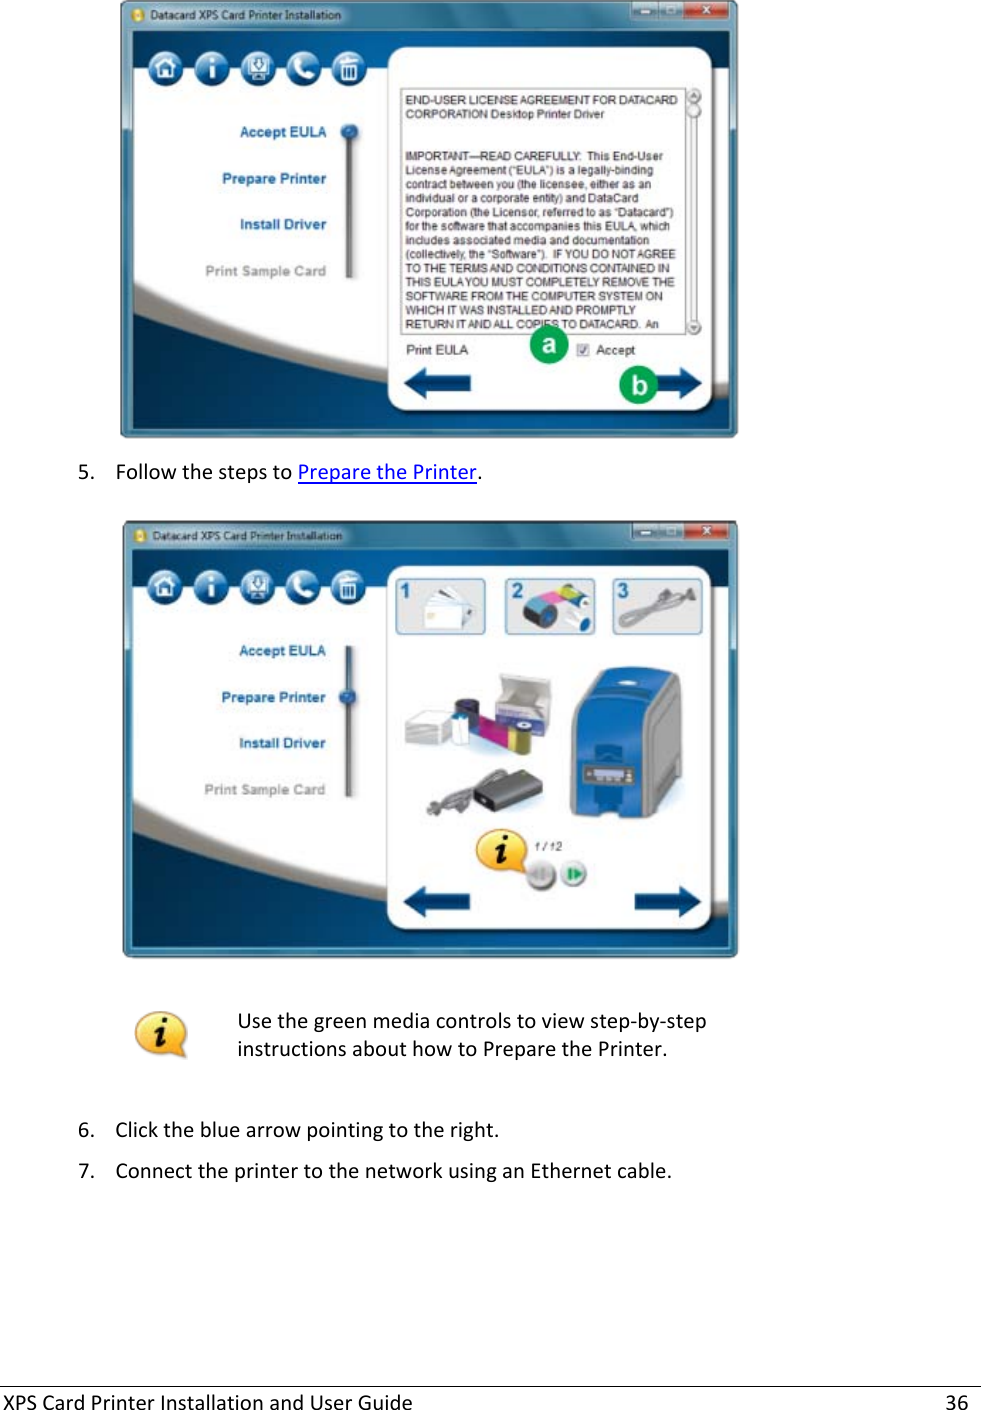 XPS Card Printer Installation and User Guide    36  5. Follow the steps to Prepare the Printer.     Use the green media controls to view step-by-step instructions about how to Prepare the Printer.  6. Click the blue arrow pointing to the right.  7. Connect the printer to the network using an Ethernet cable. 